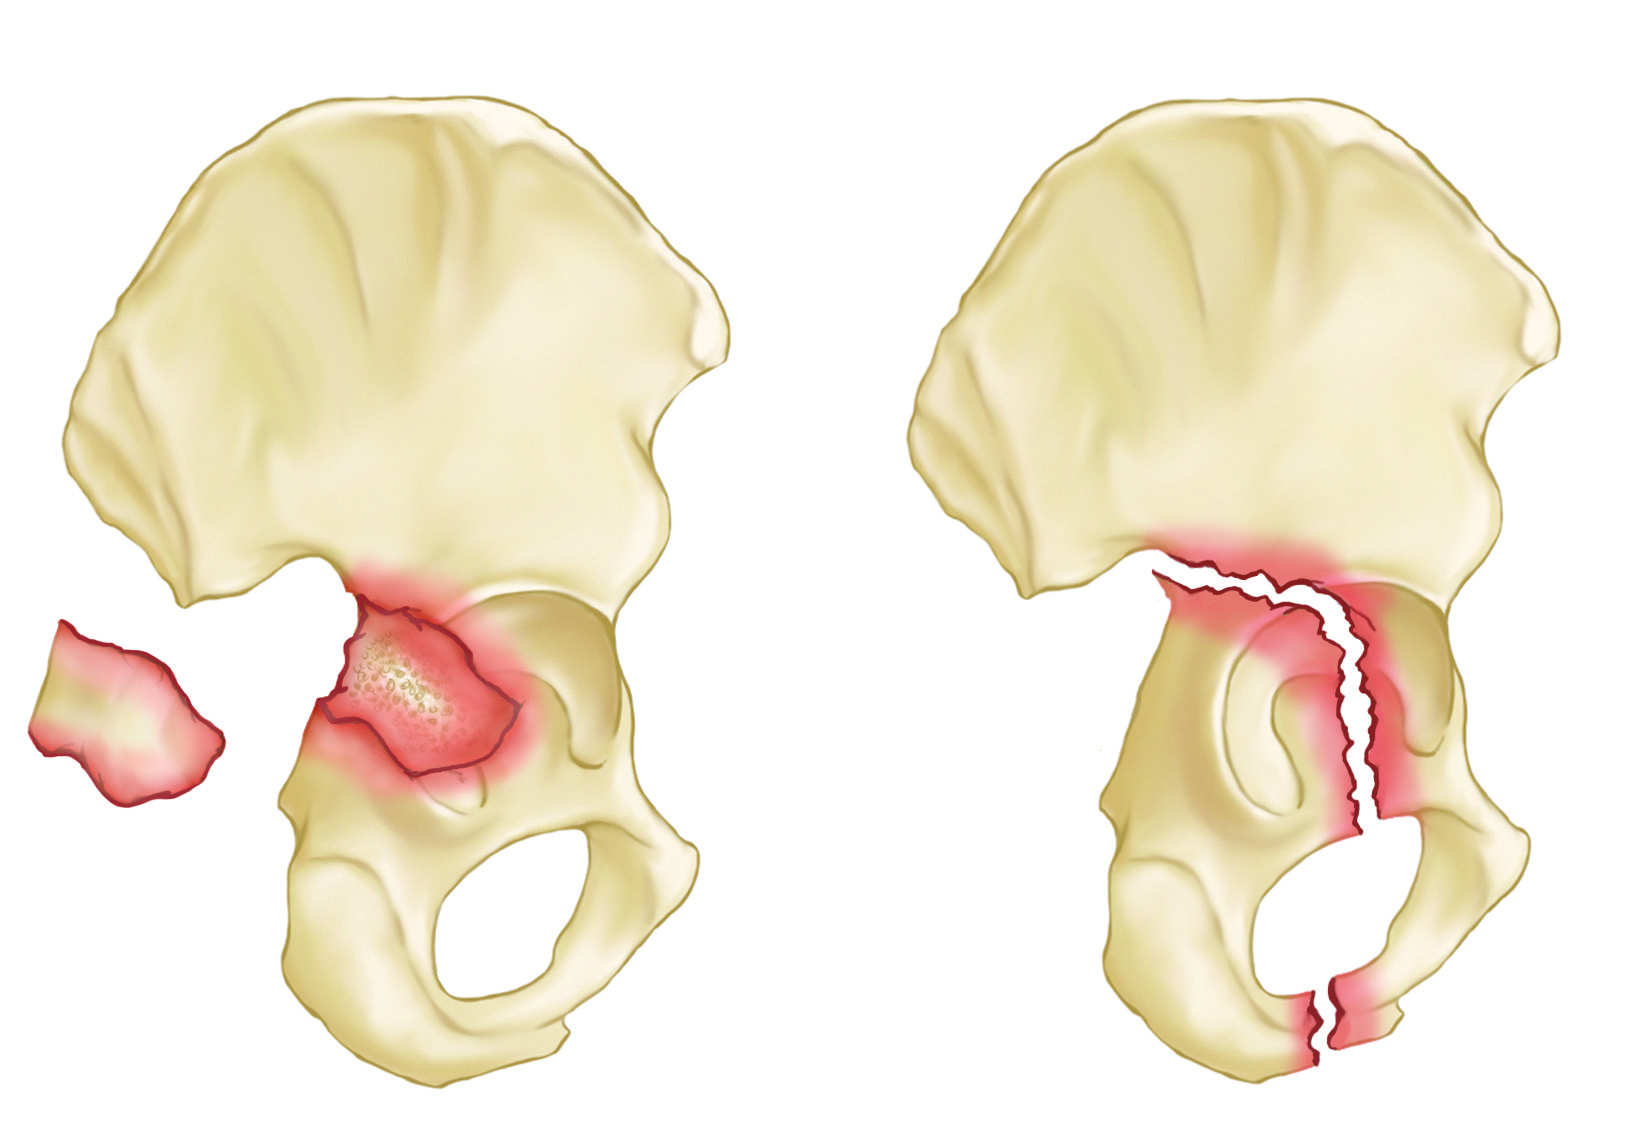 Posterior wall and posterior column acetabulum fractures